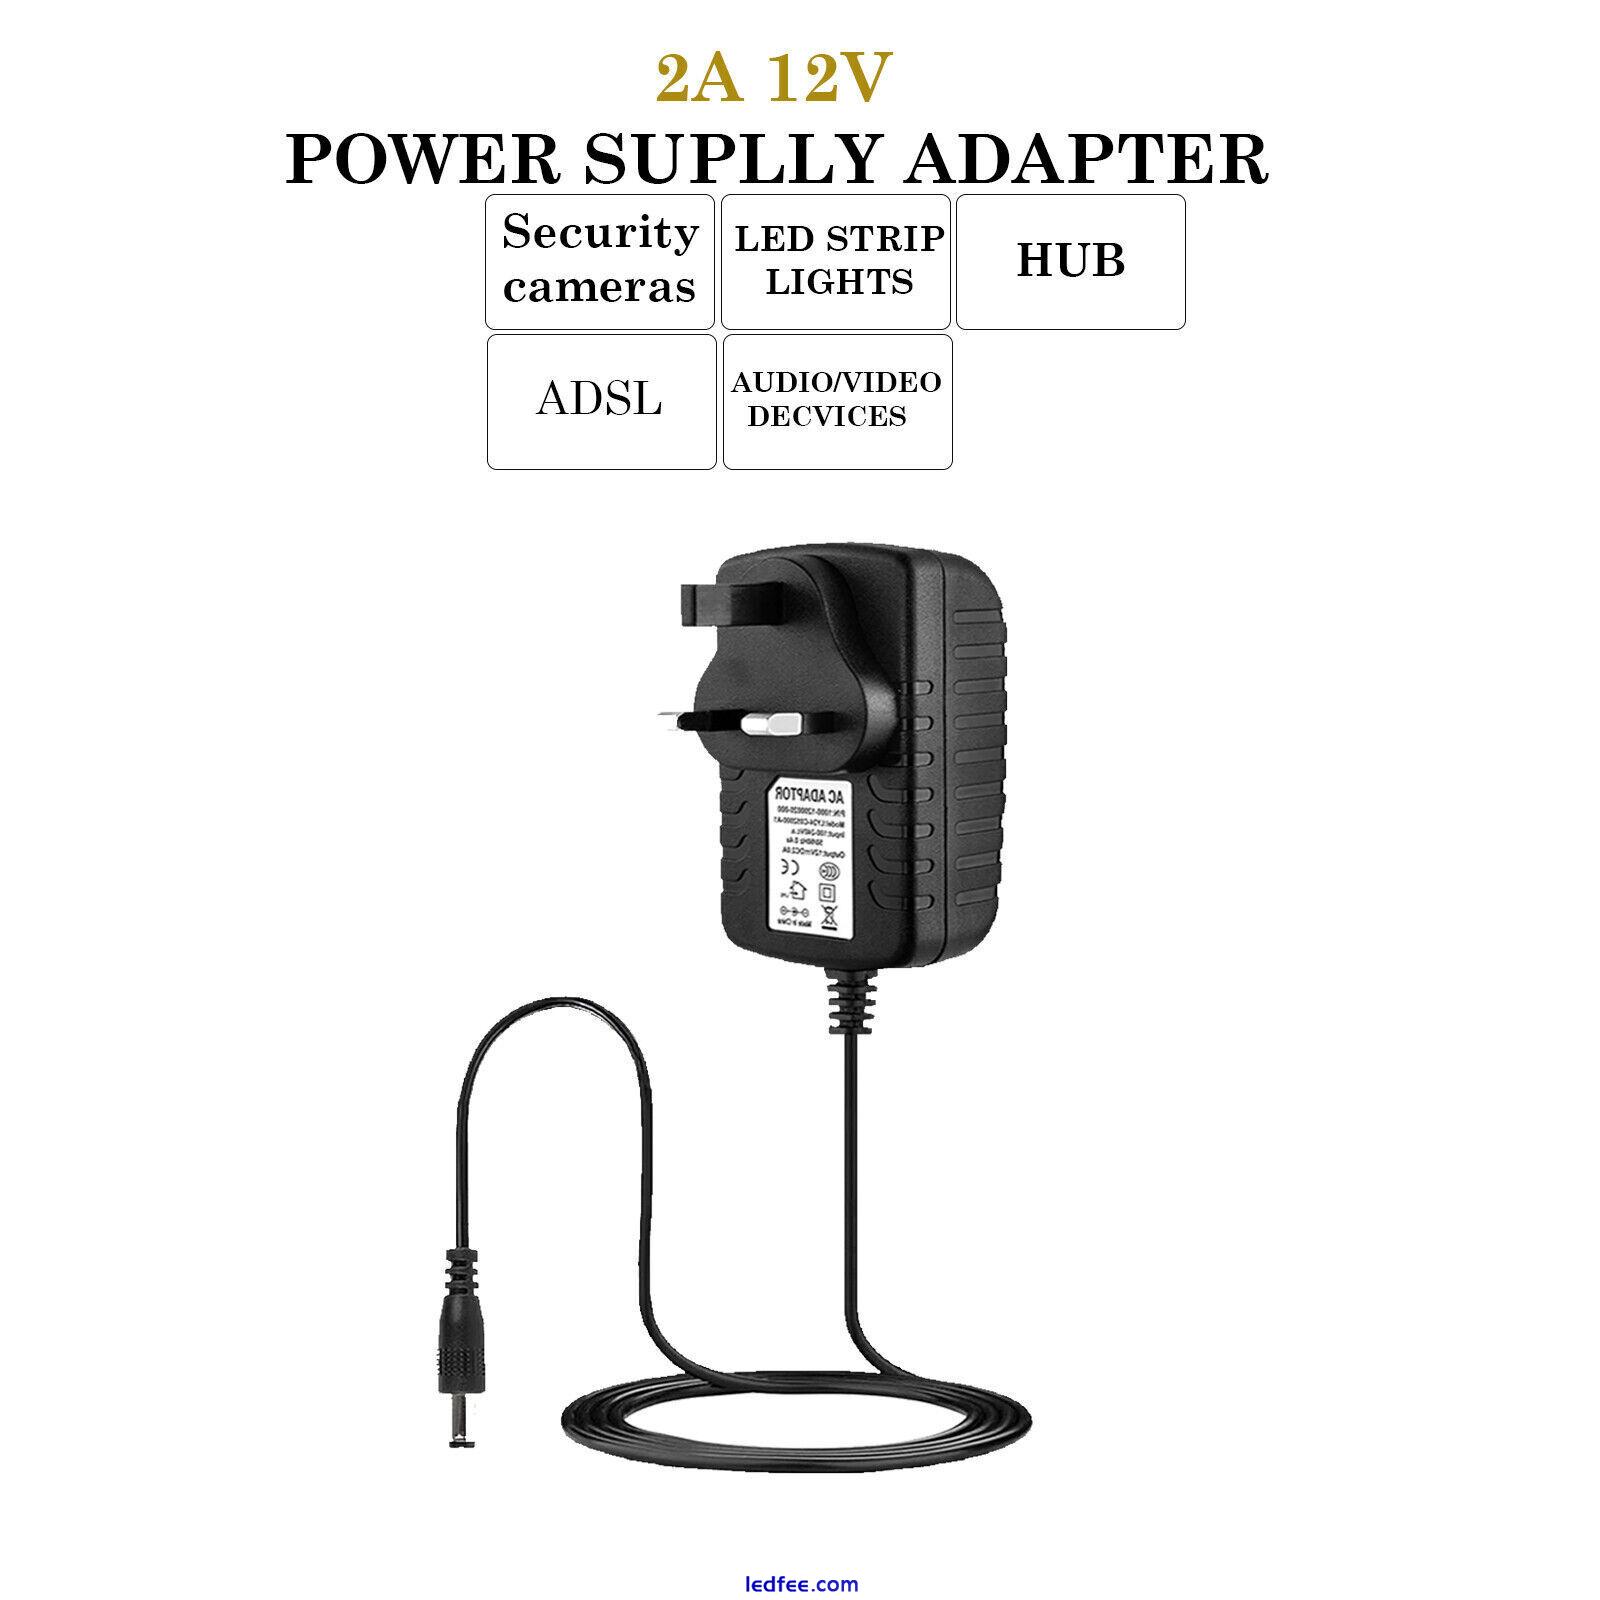 12V 1A 2A Adapter AC/DC UK Power Supply Safety Charger For LED Strip CCTV Camera 0 